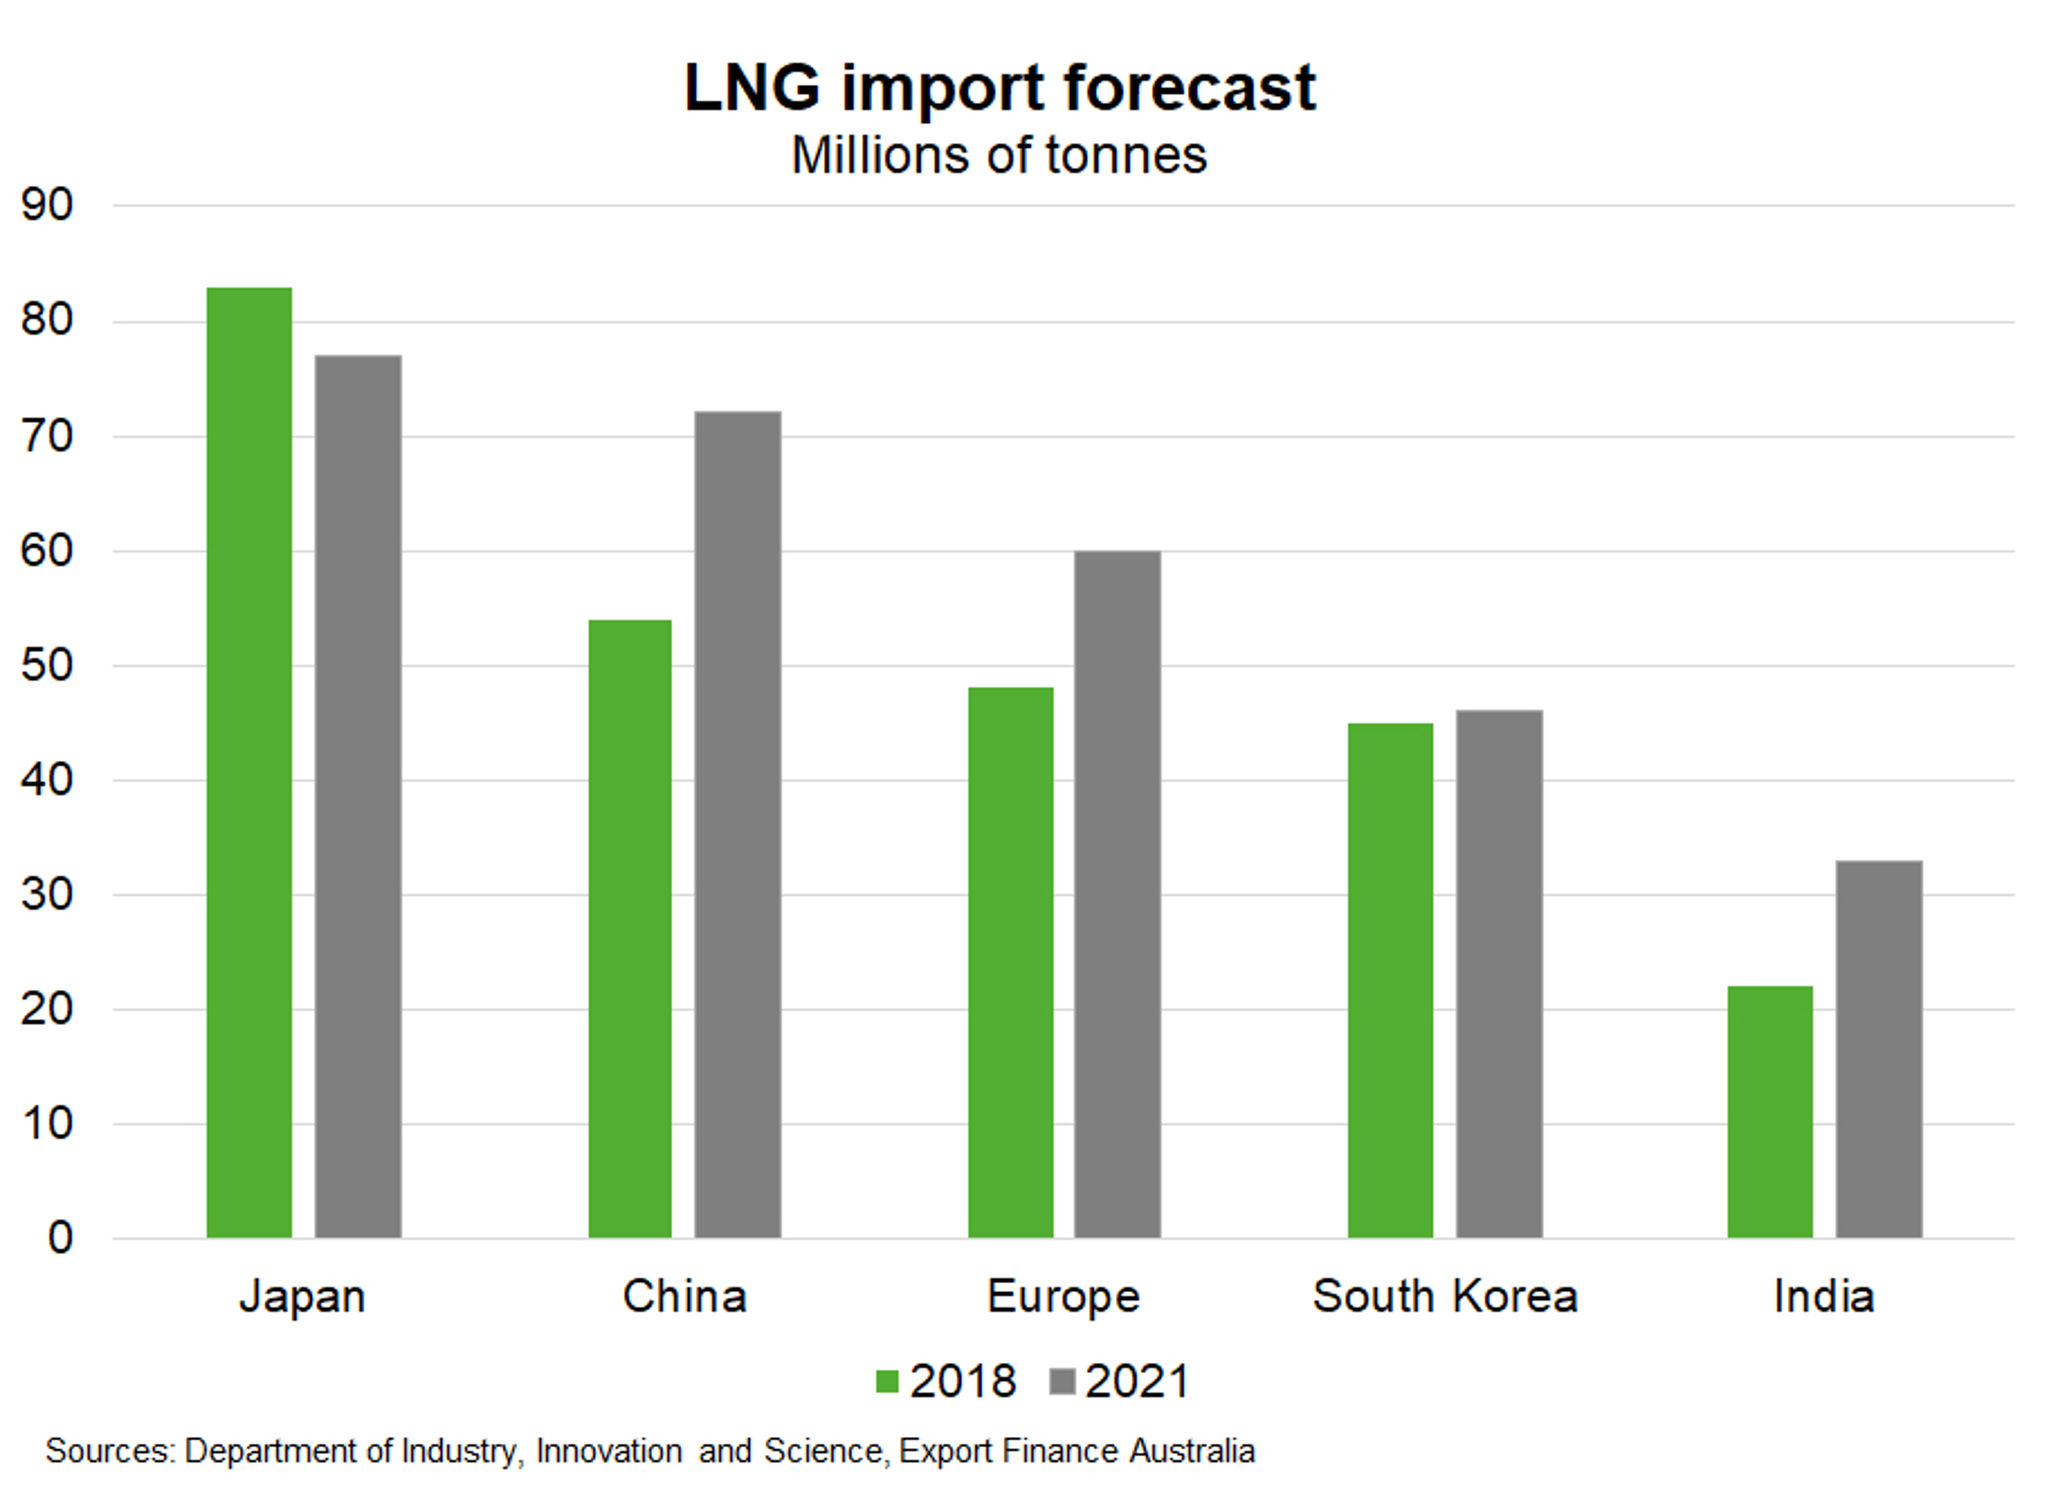 LNG—Chinese demand on the rise